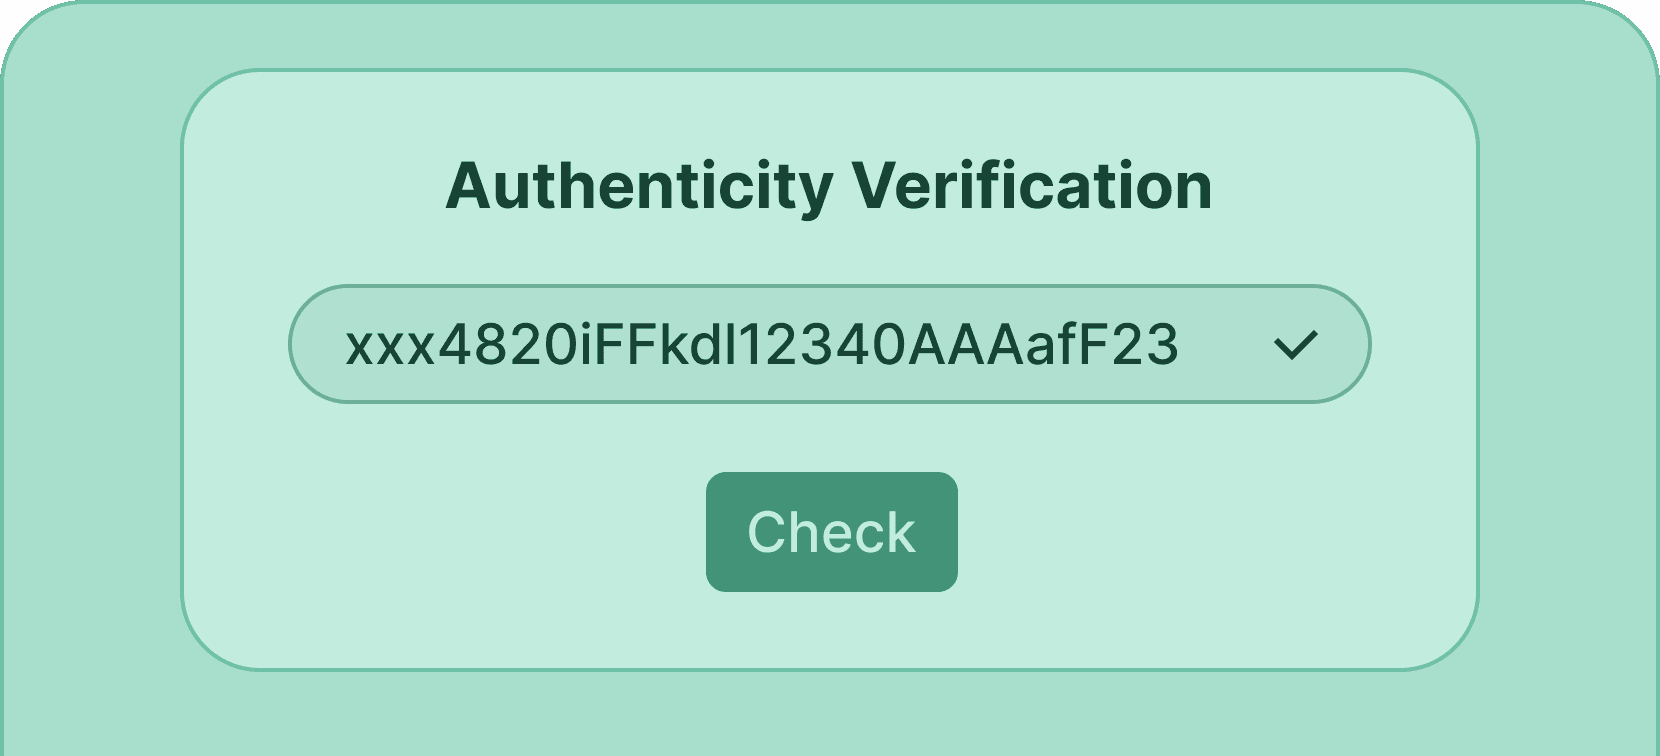 certifier-features-uuid-based-verification